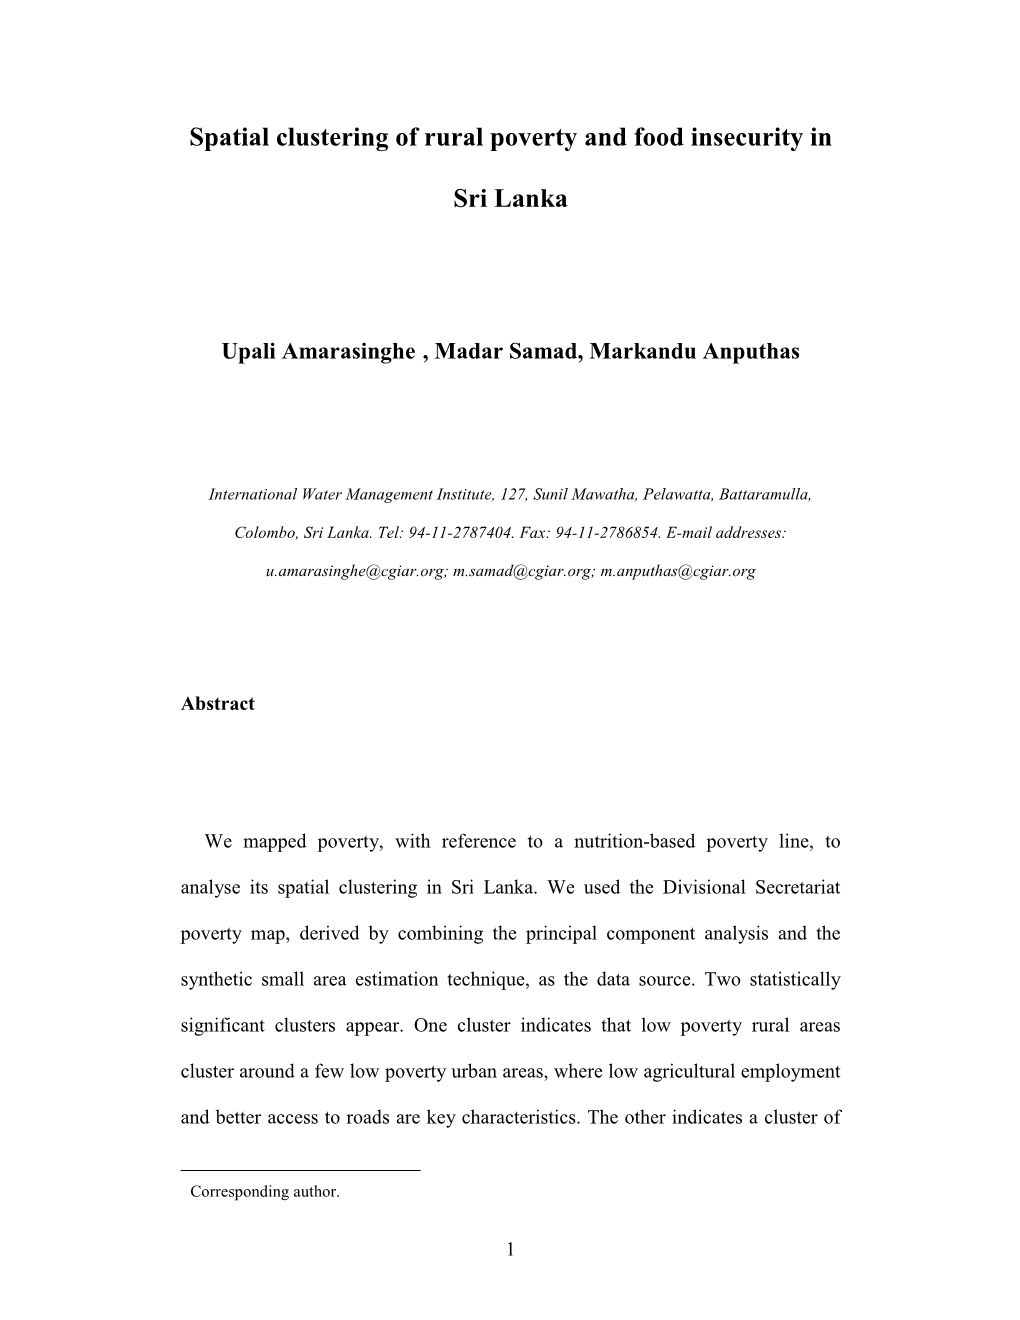 Spatial Clustering of Rural Poverty and Food Insecurity in Sri Lanka